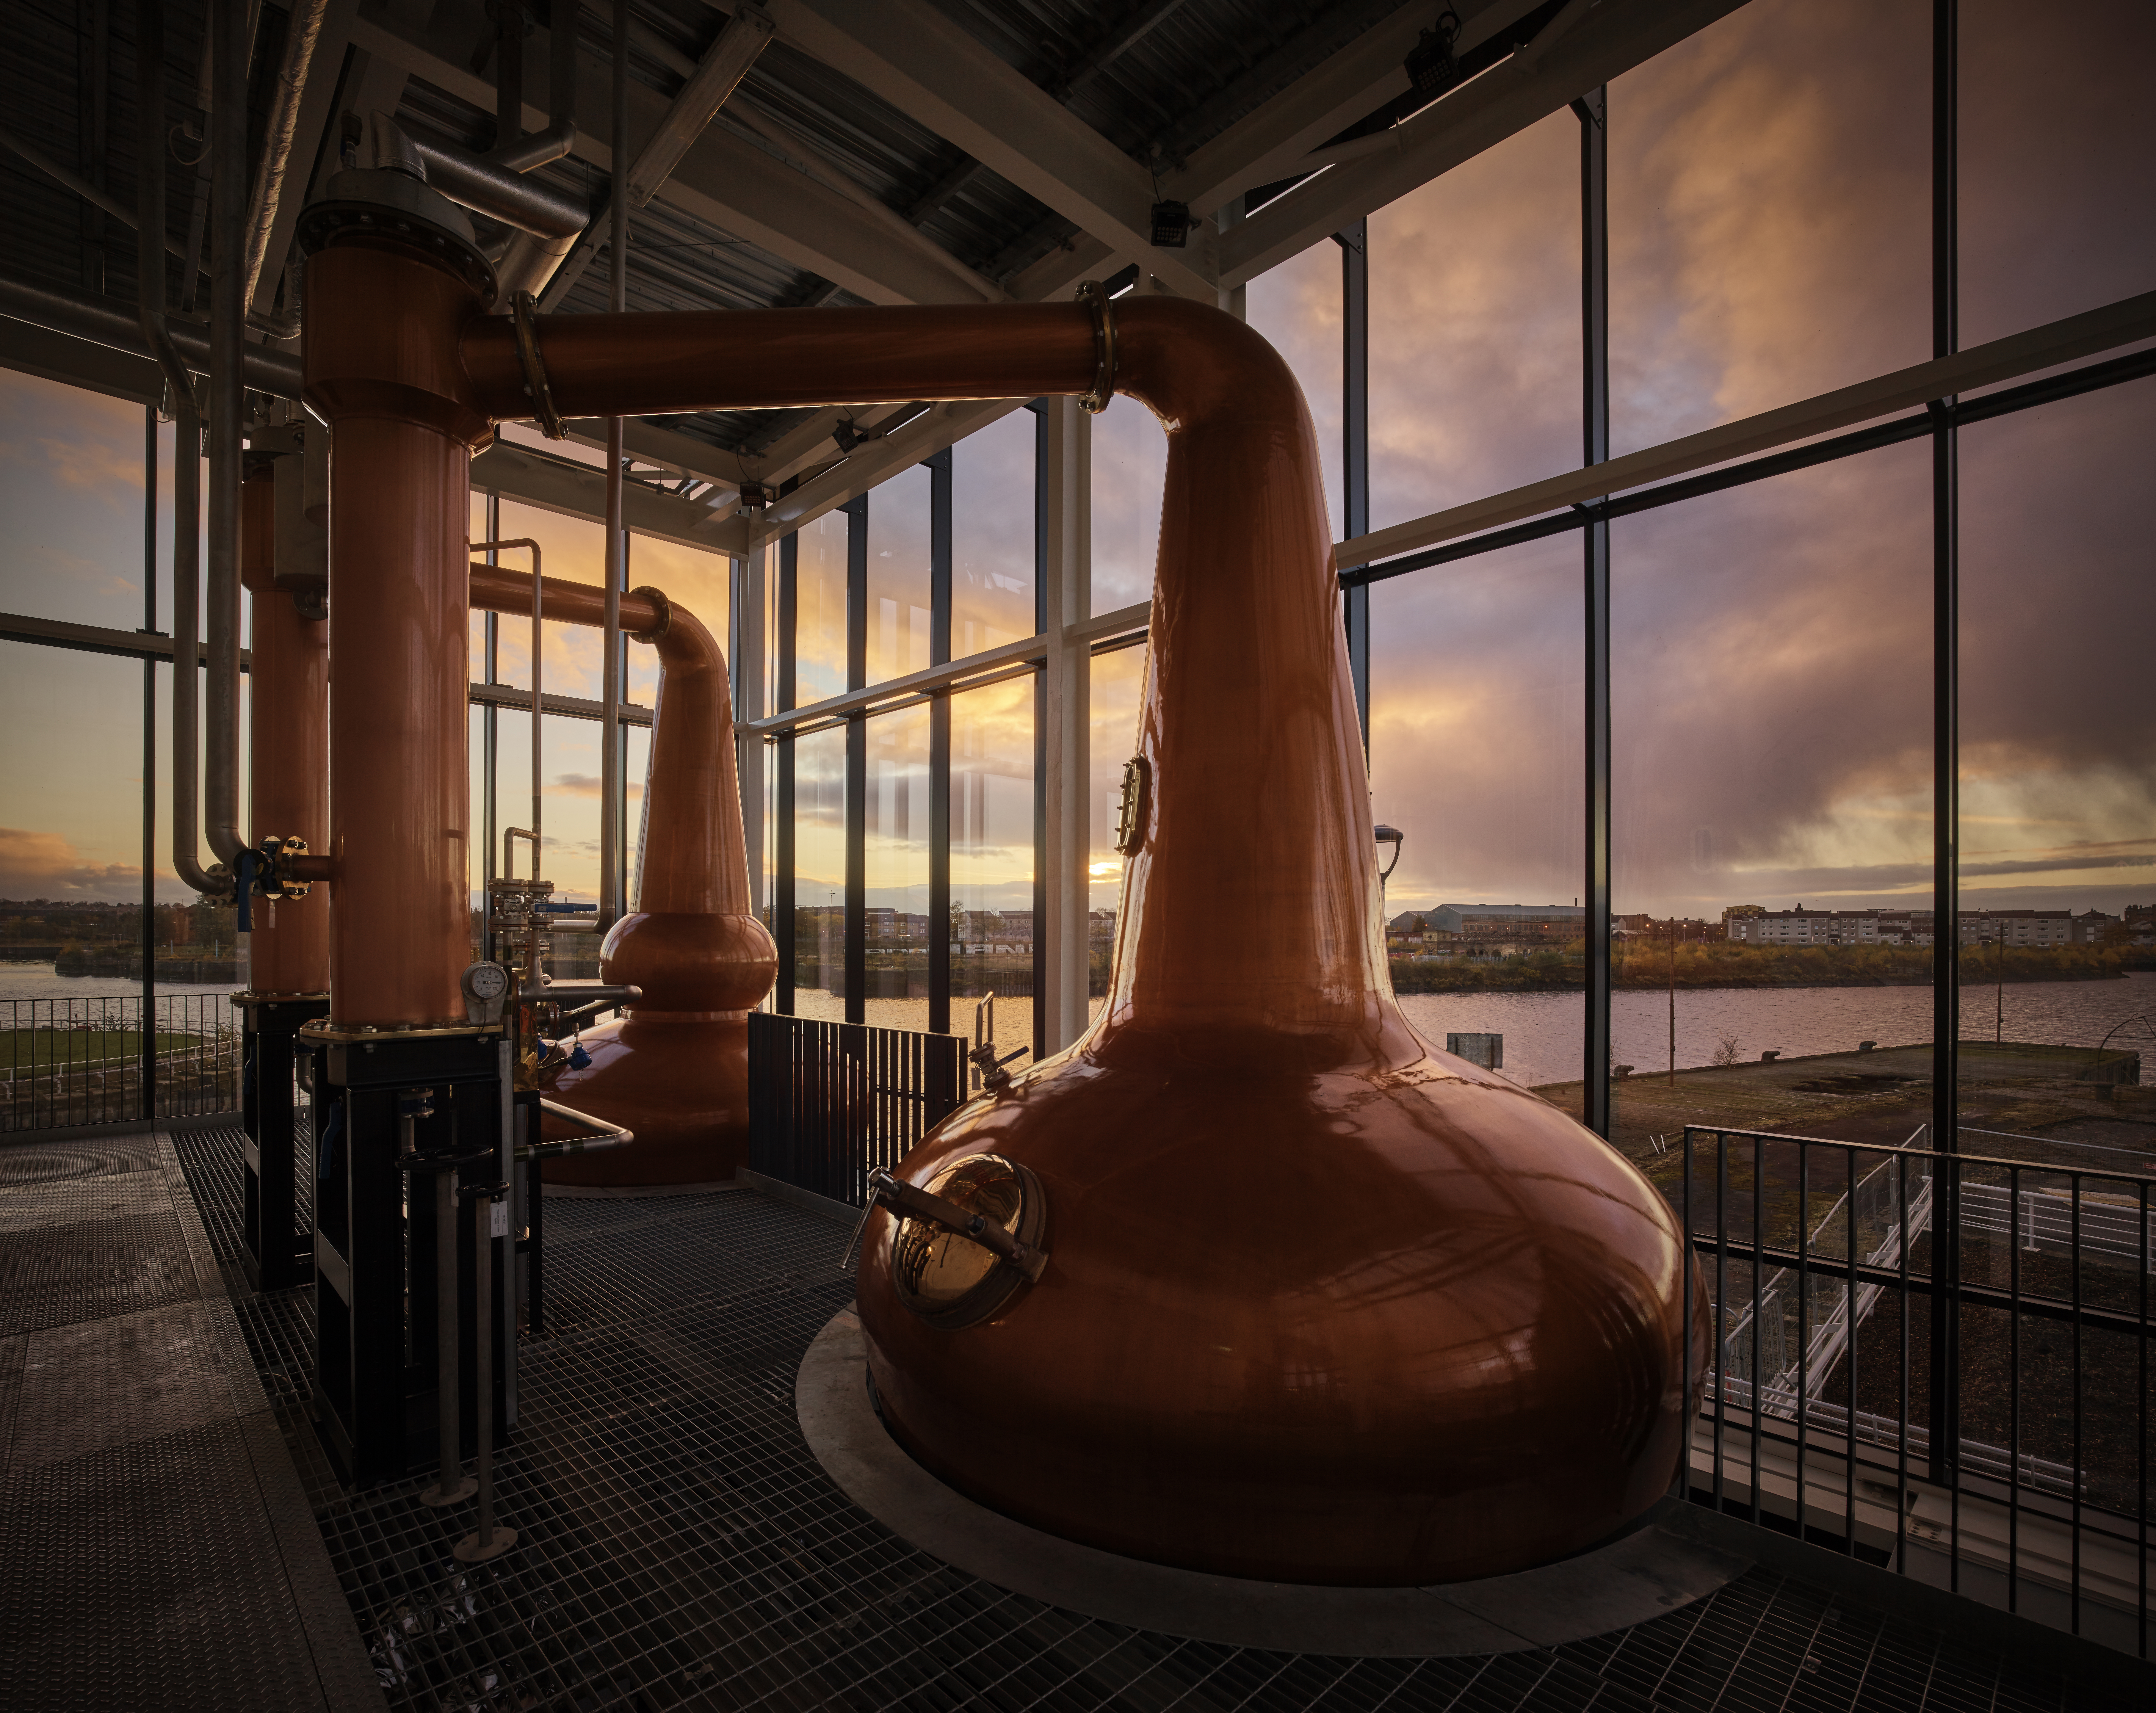 Two Clydeside copper stills glow behind a sunset over the River Clyde